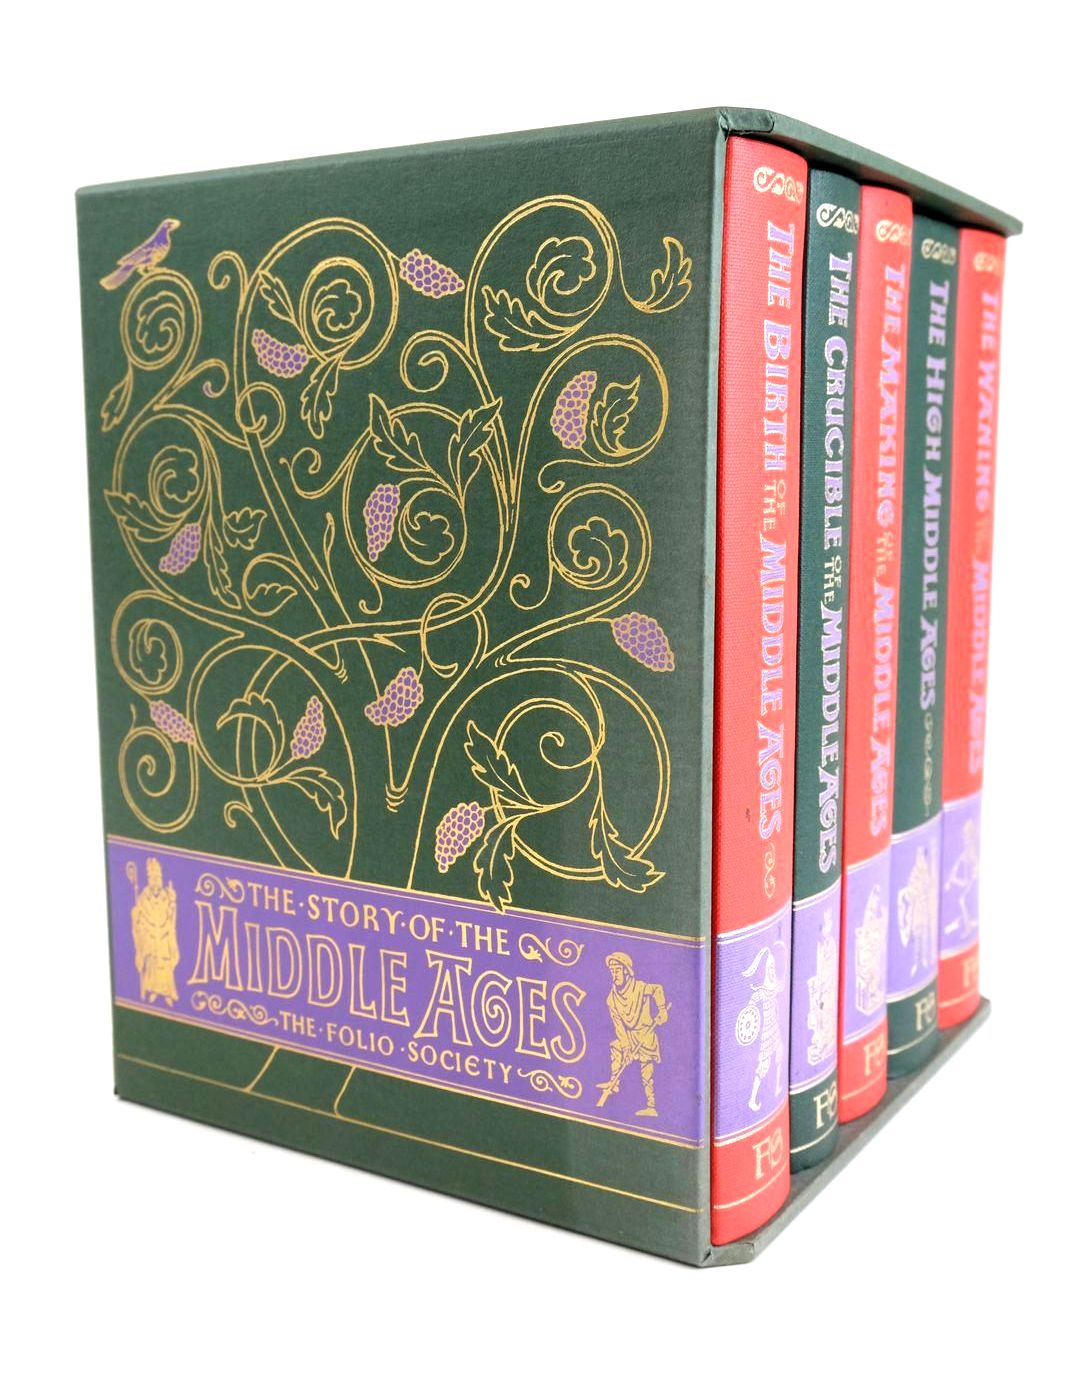 Photo of THE STORY OF THE MIDDLE AGES (5 VOLUMES) written by Moss, H. St. L.B. Barraclough, Geoffrey Southern, R.W. Mundy, John H. Huizinga, Johan published by Folio Society (STOCK CODE: 1327917)  for sale by Stella & Rose's Books